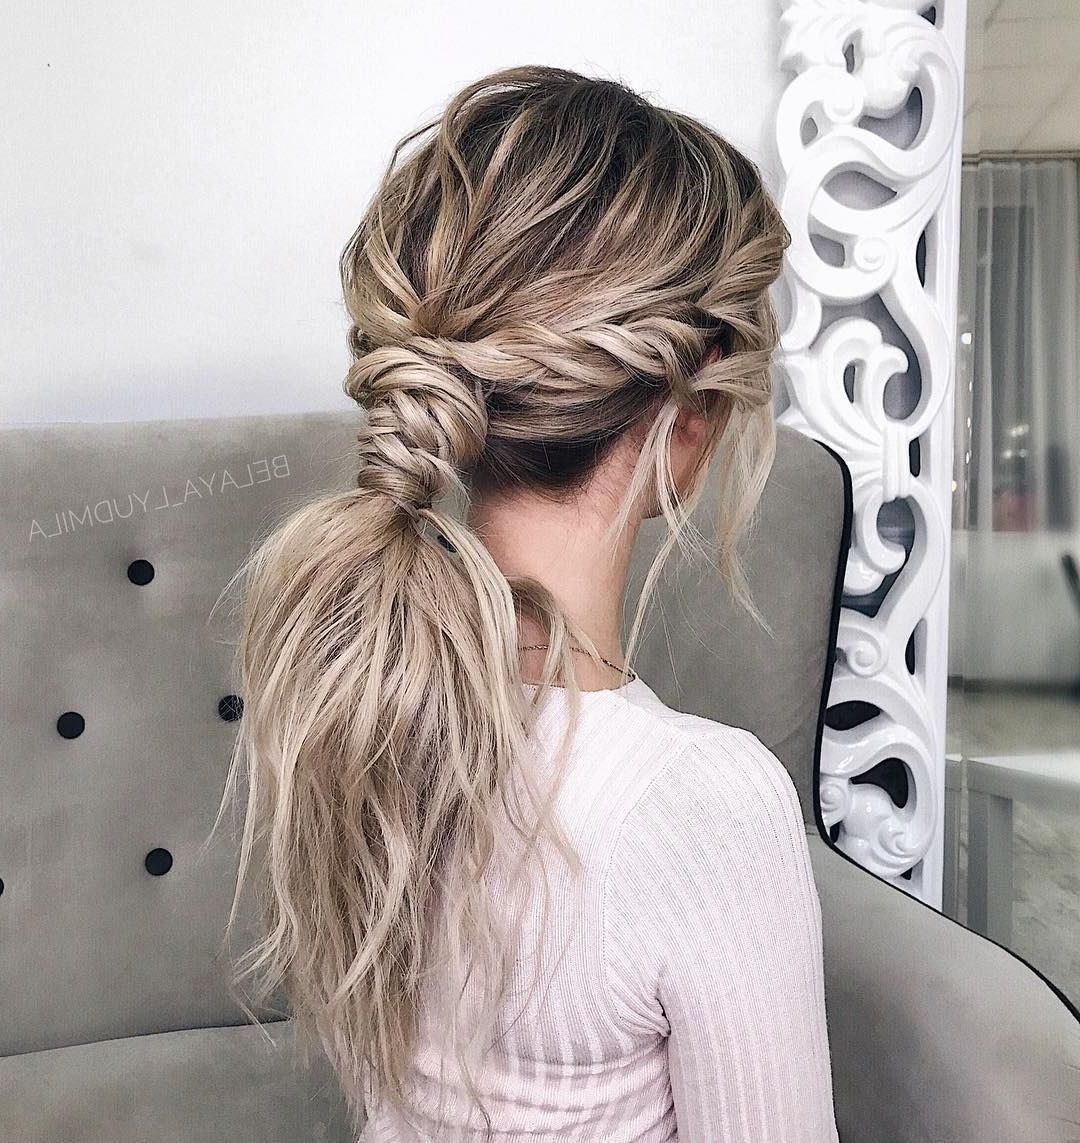 Fashionable Pony Hairstyles With Textured Braid In 39 Ponytail Hairstyle Inspiration , Braids ,hairstyles ,braided (View 1 of 20)